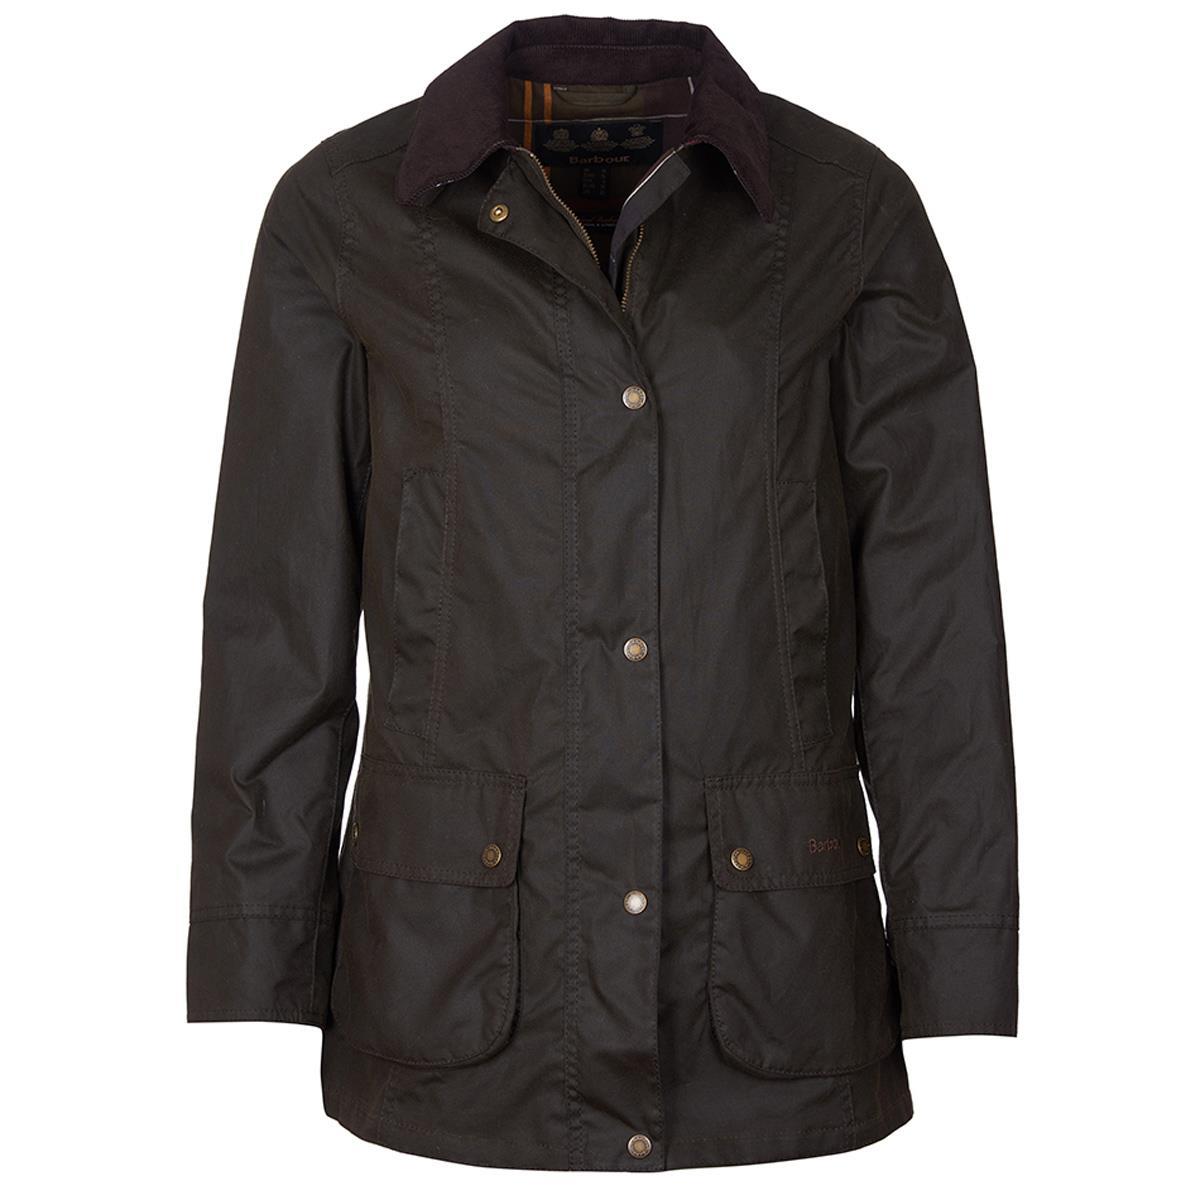 What are the extra attributes of the Barbour Fiddich women's wax jacket?